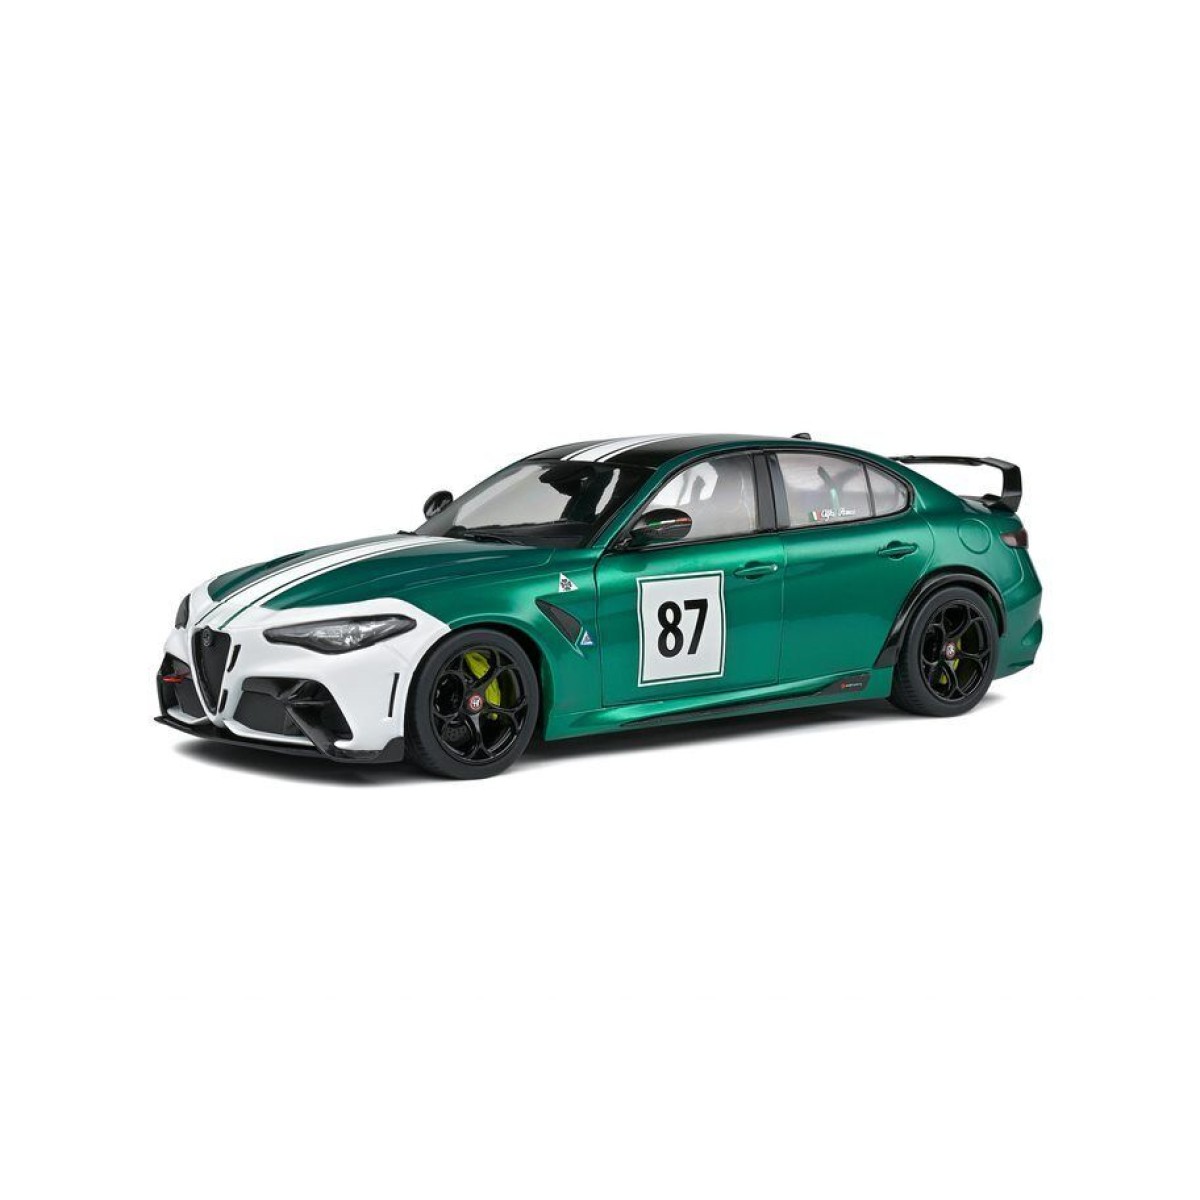 Jonge dame toxiciteit Carrière Alfa Romeo | Giulia | GTM-A | 2021 | #87 Nurburgring | Solido | S1806902 |  1:18 | Bram-modelcars | Groot assortiment modelauto's